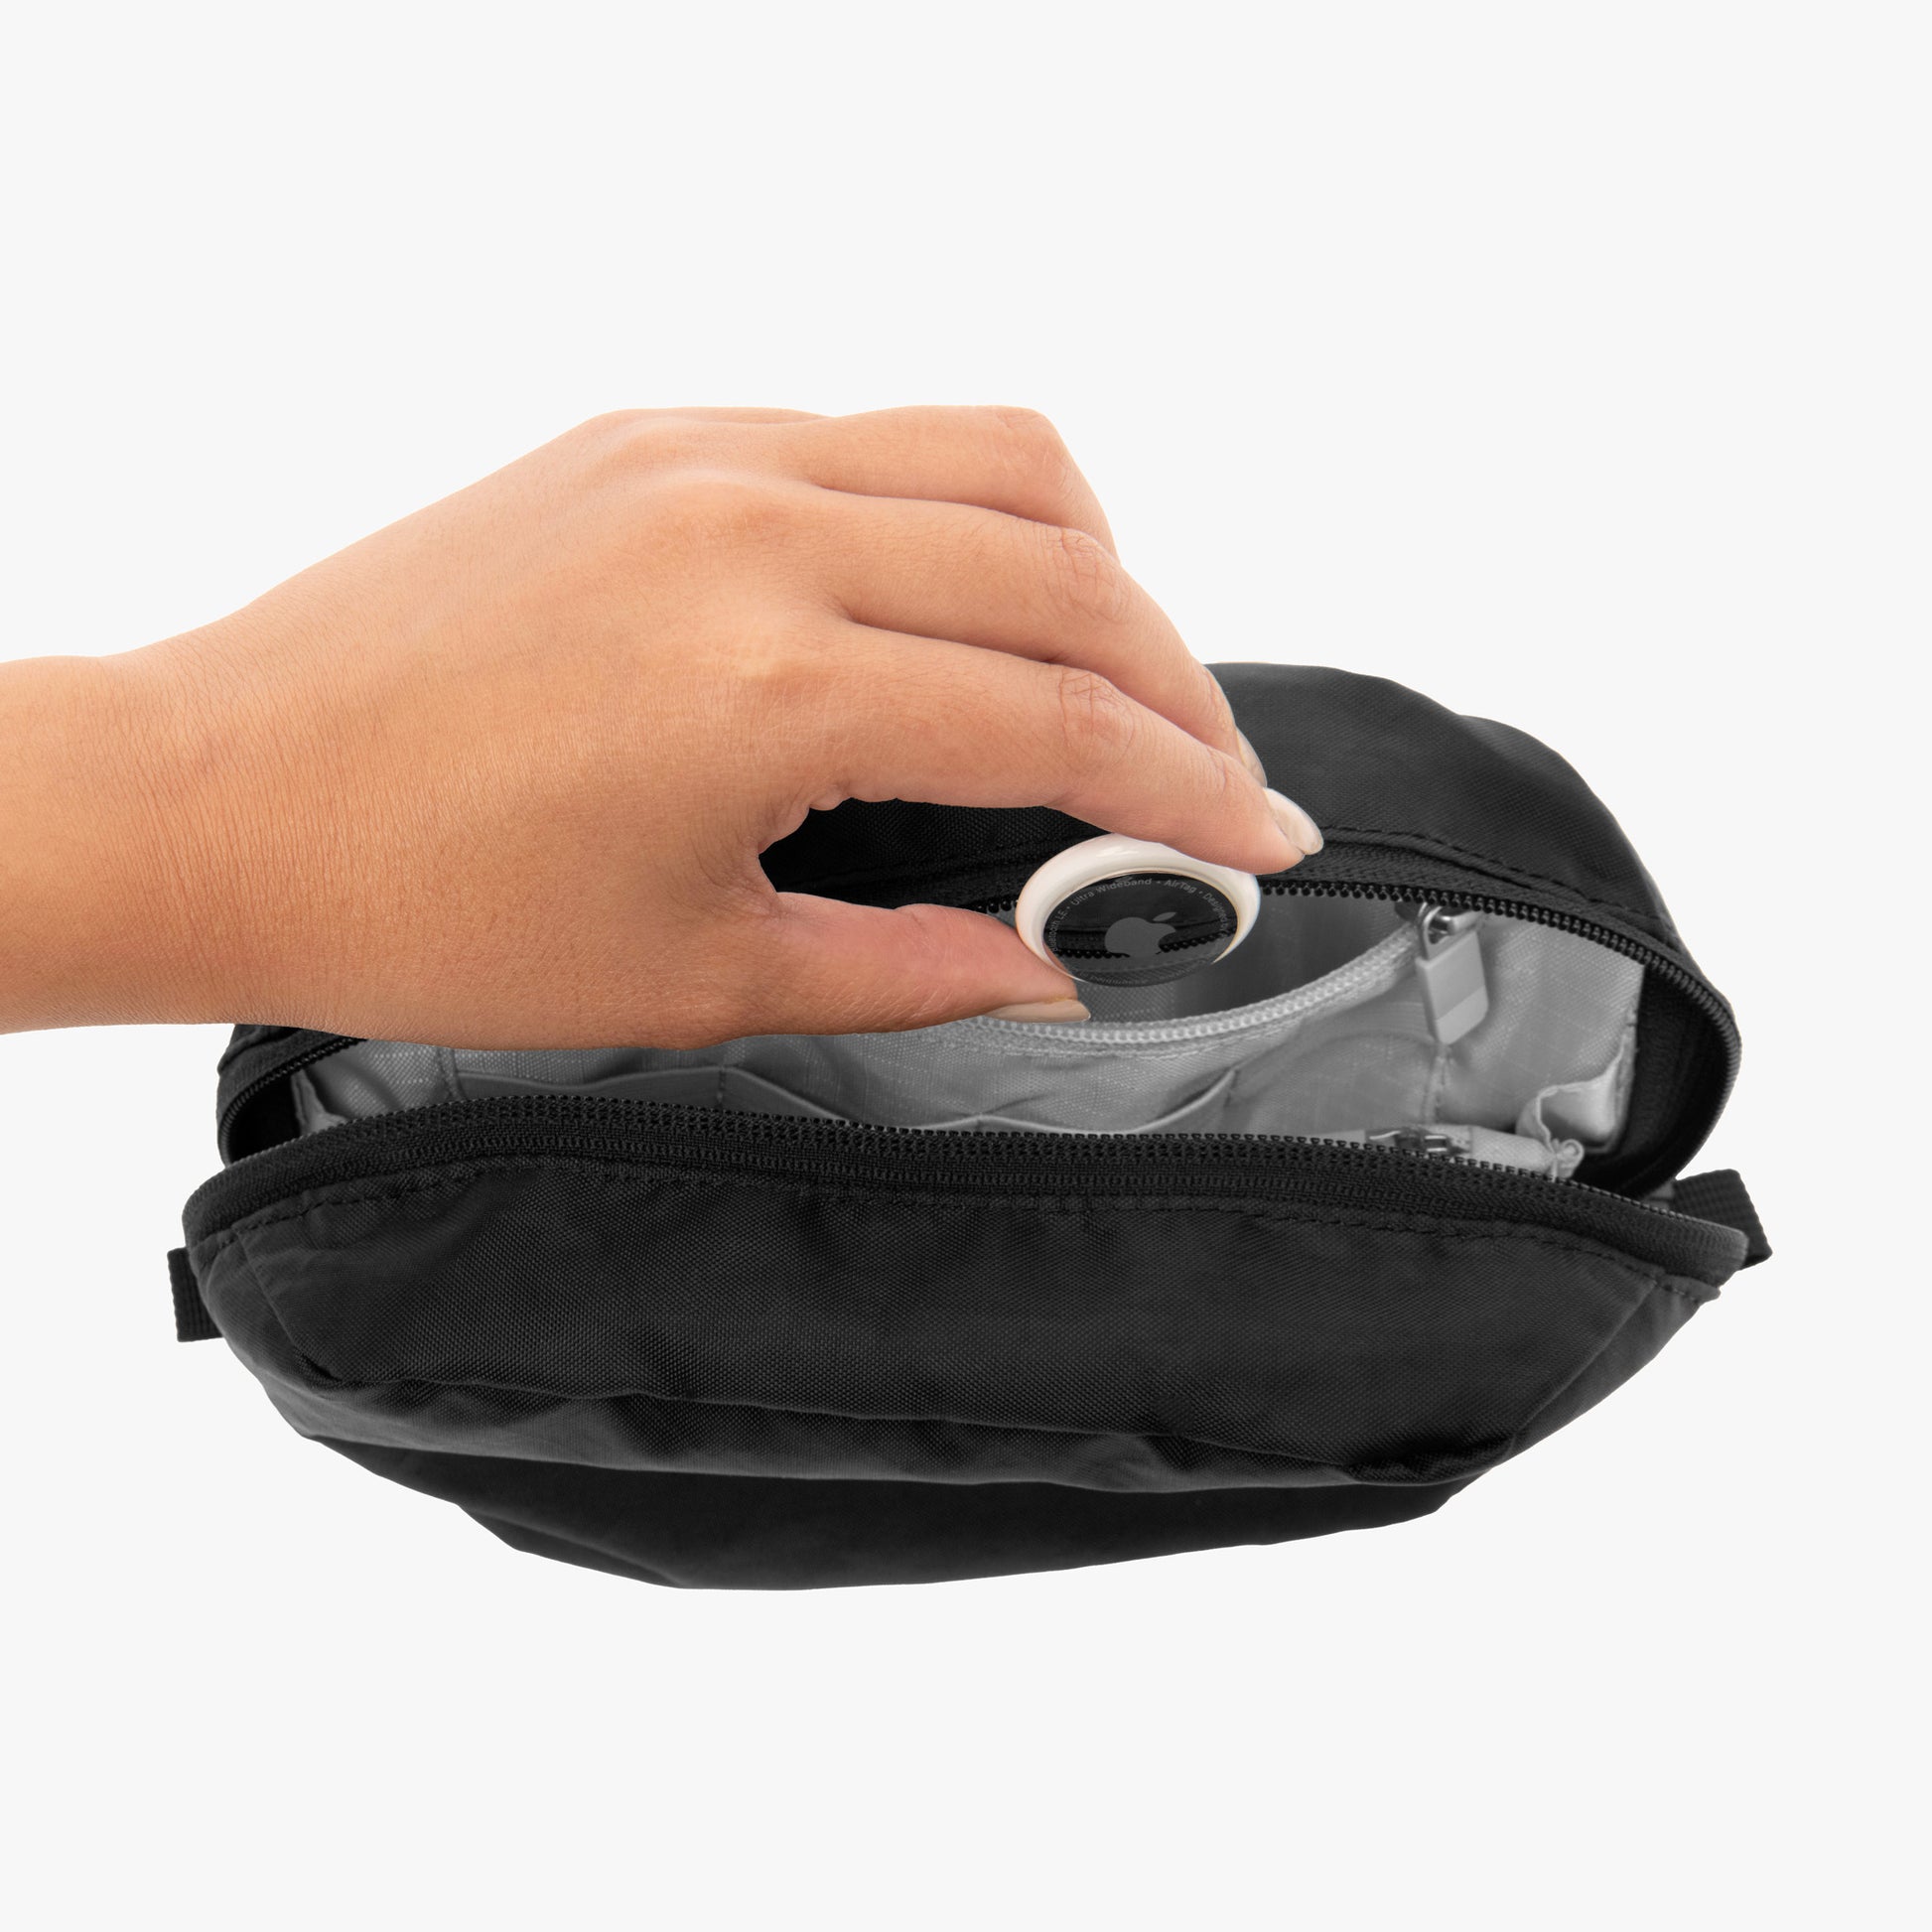 Keep track of your bag with an AirTag